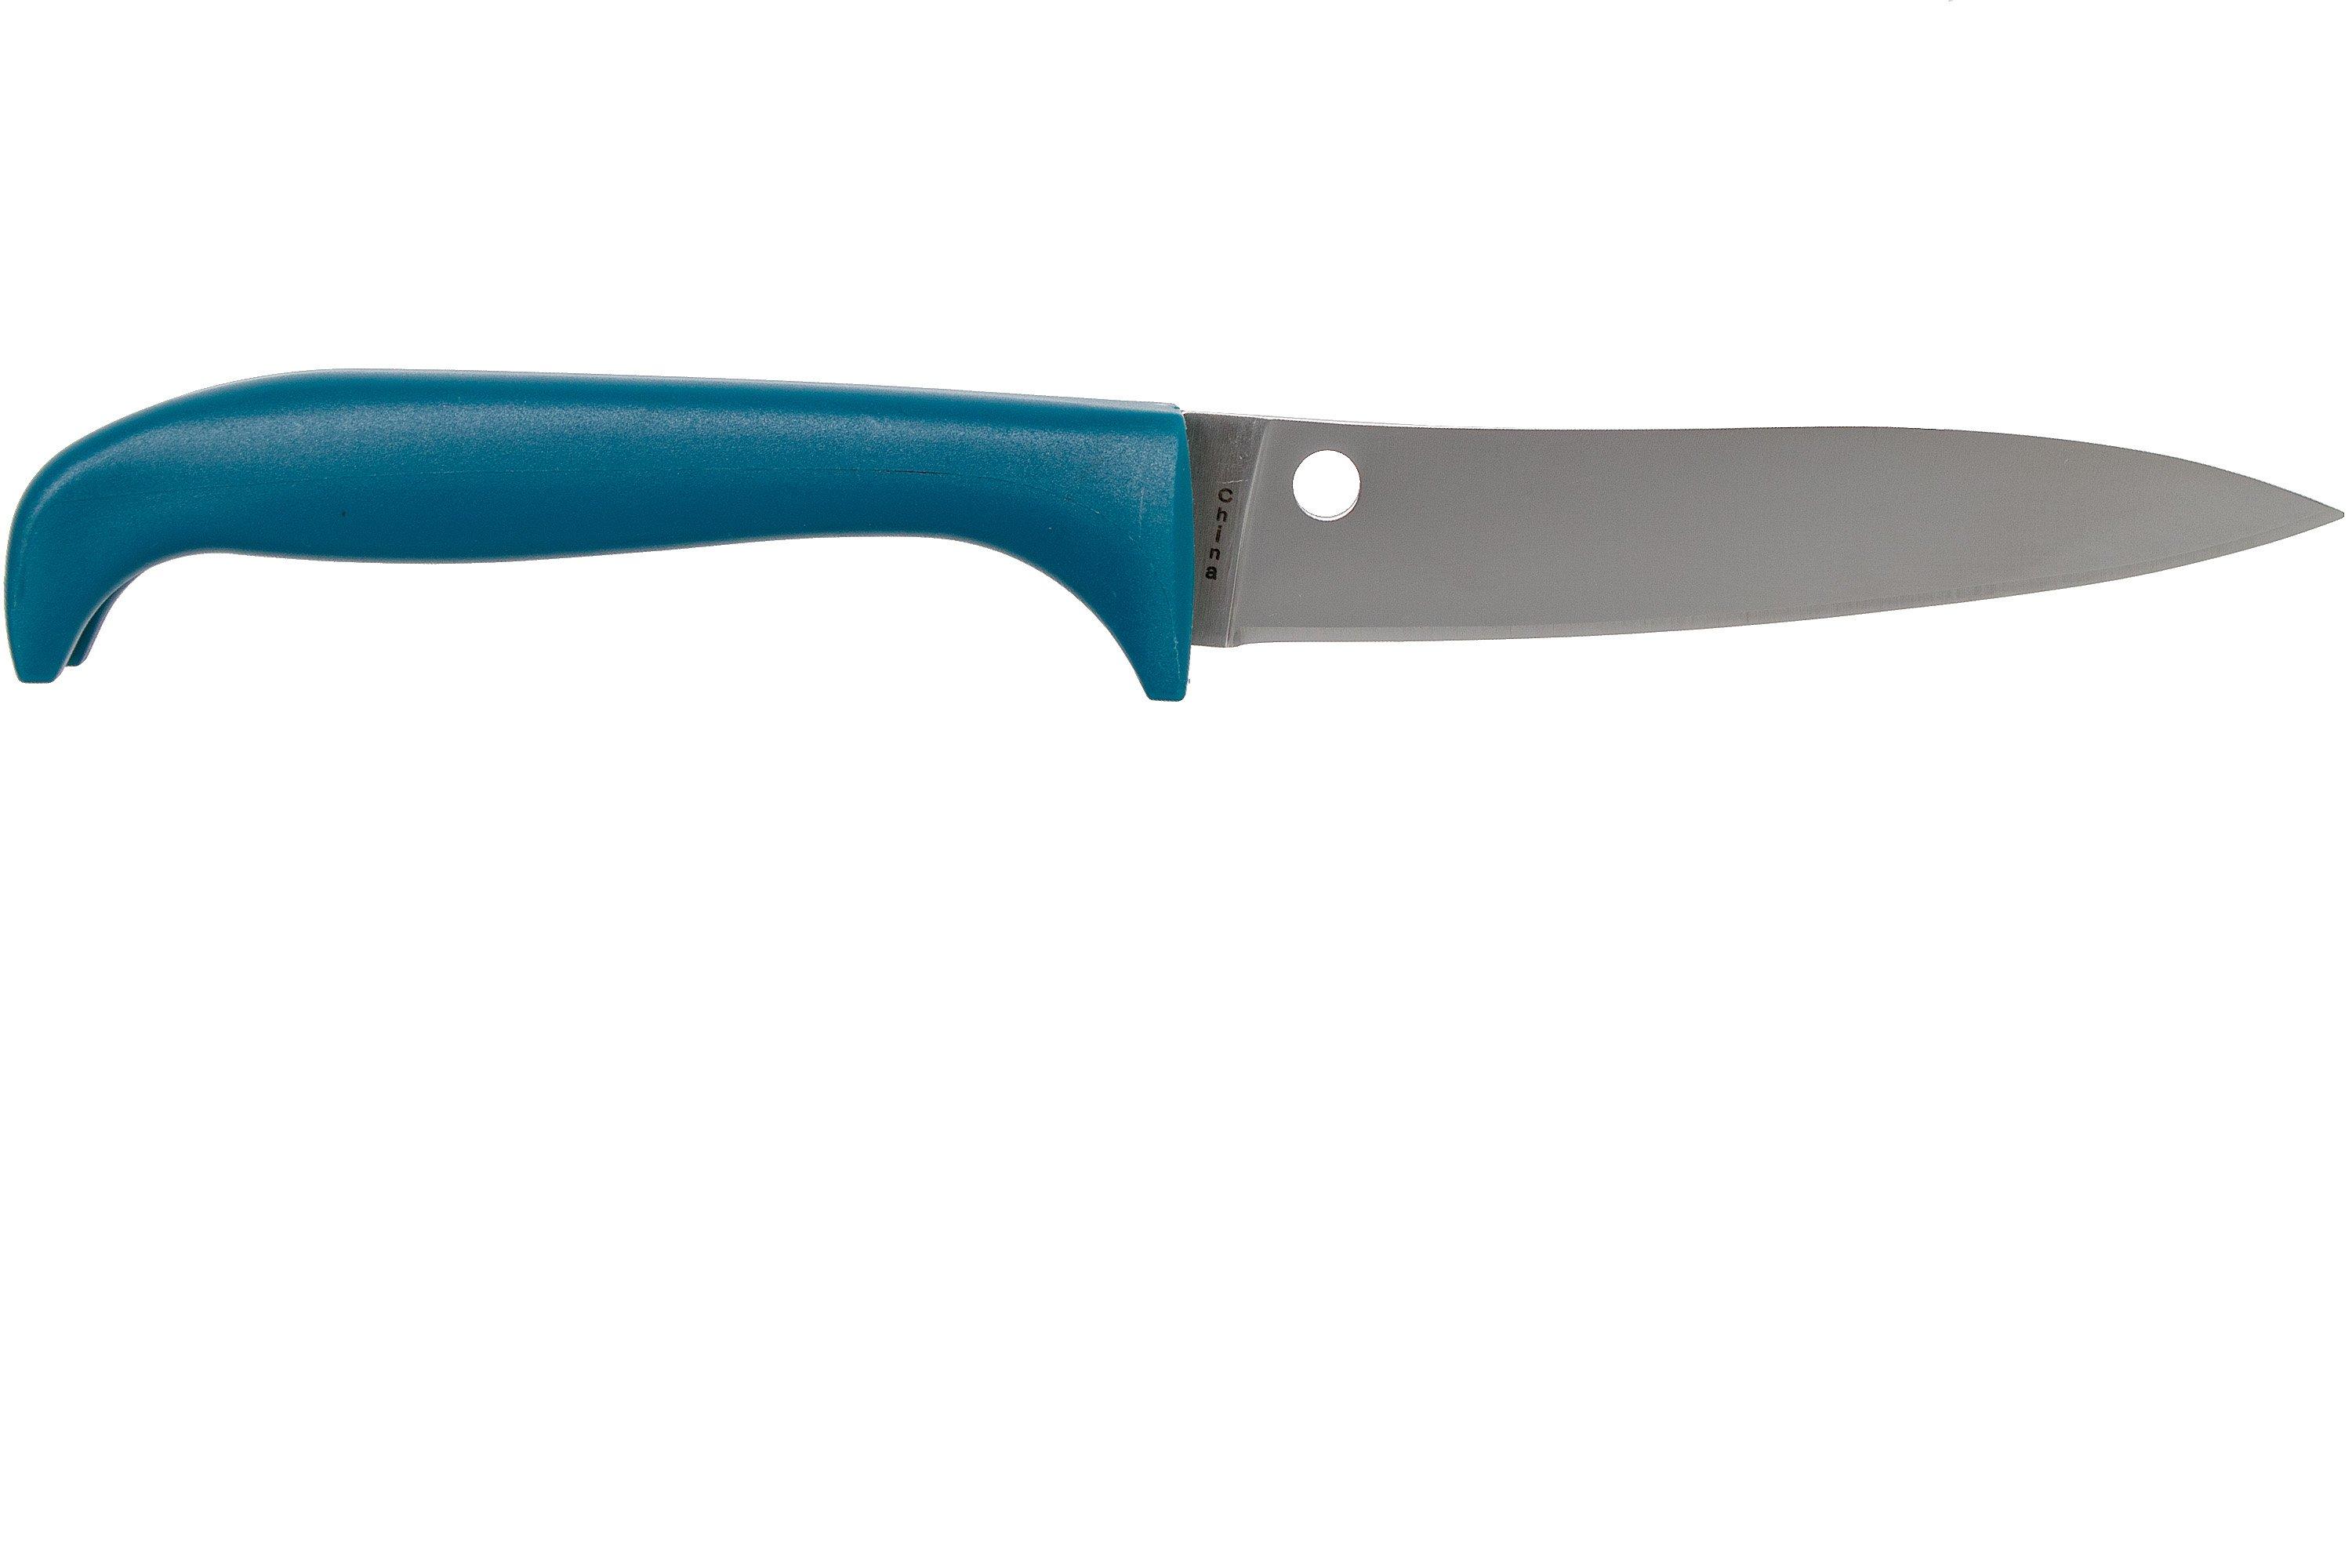 Spyderco Counter Puppy Kitchen Knife Blue Plastic Handle 7Cr17